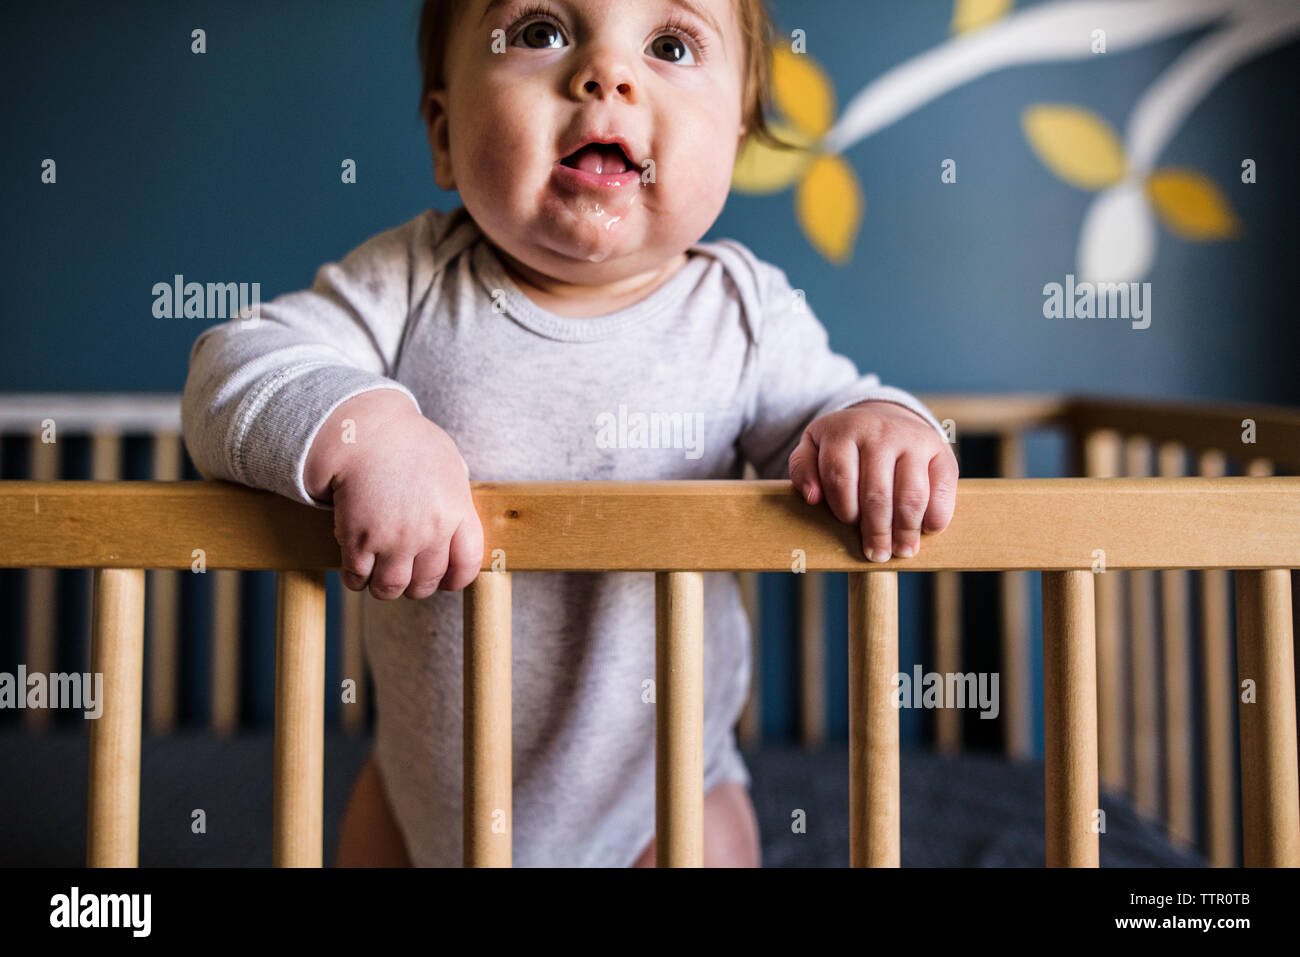 close up of drooling baby standing and leaning against crib rail Stock Photo